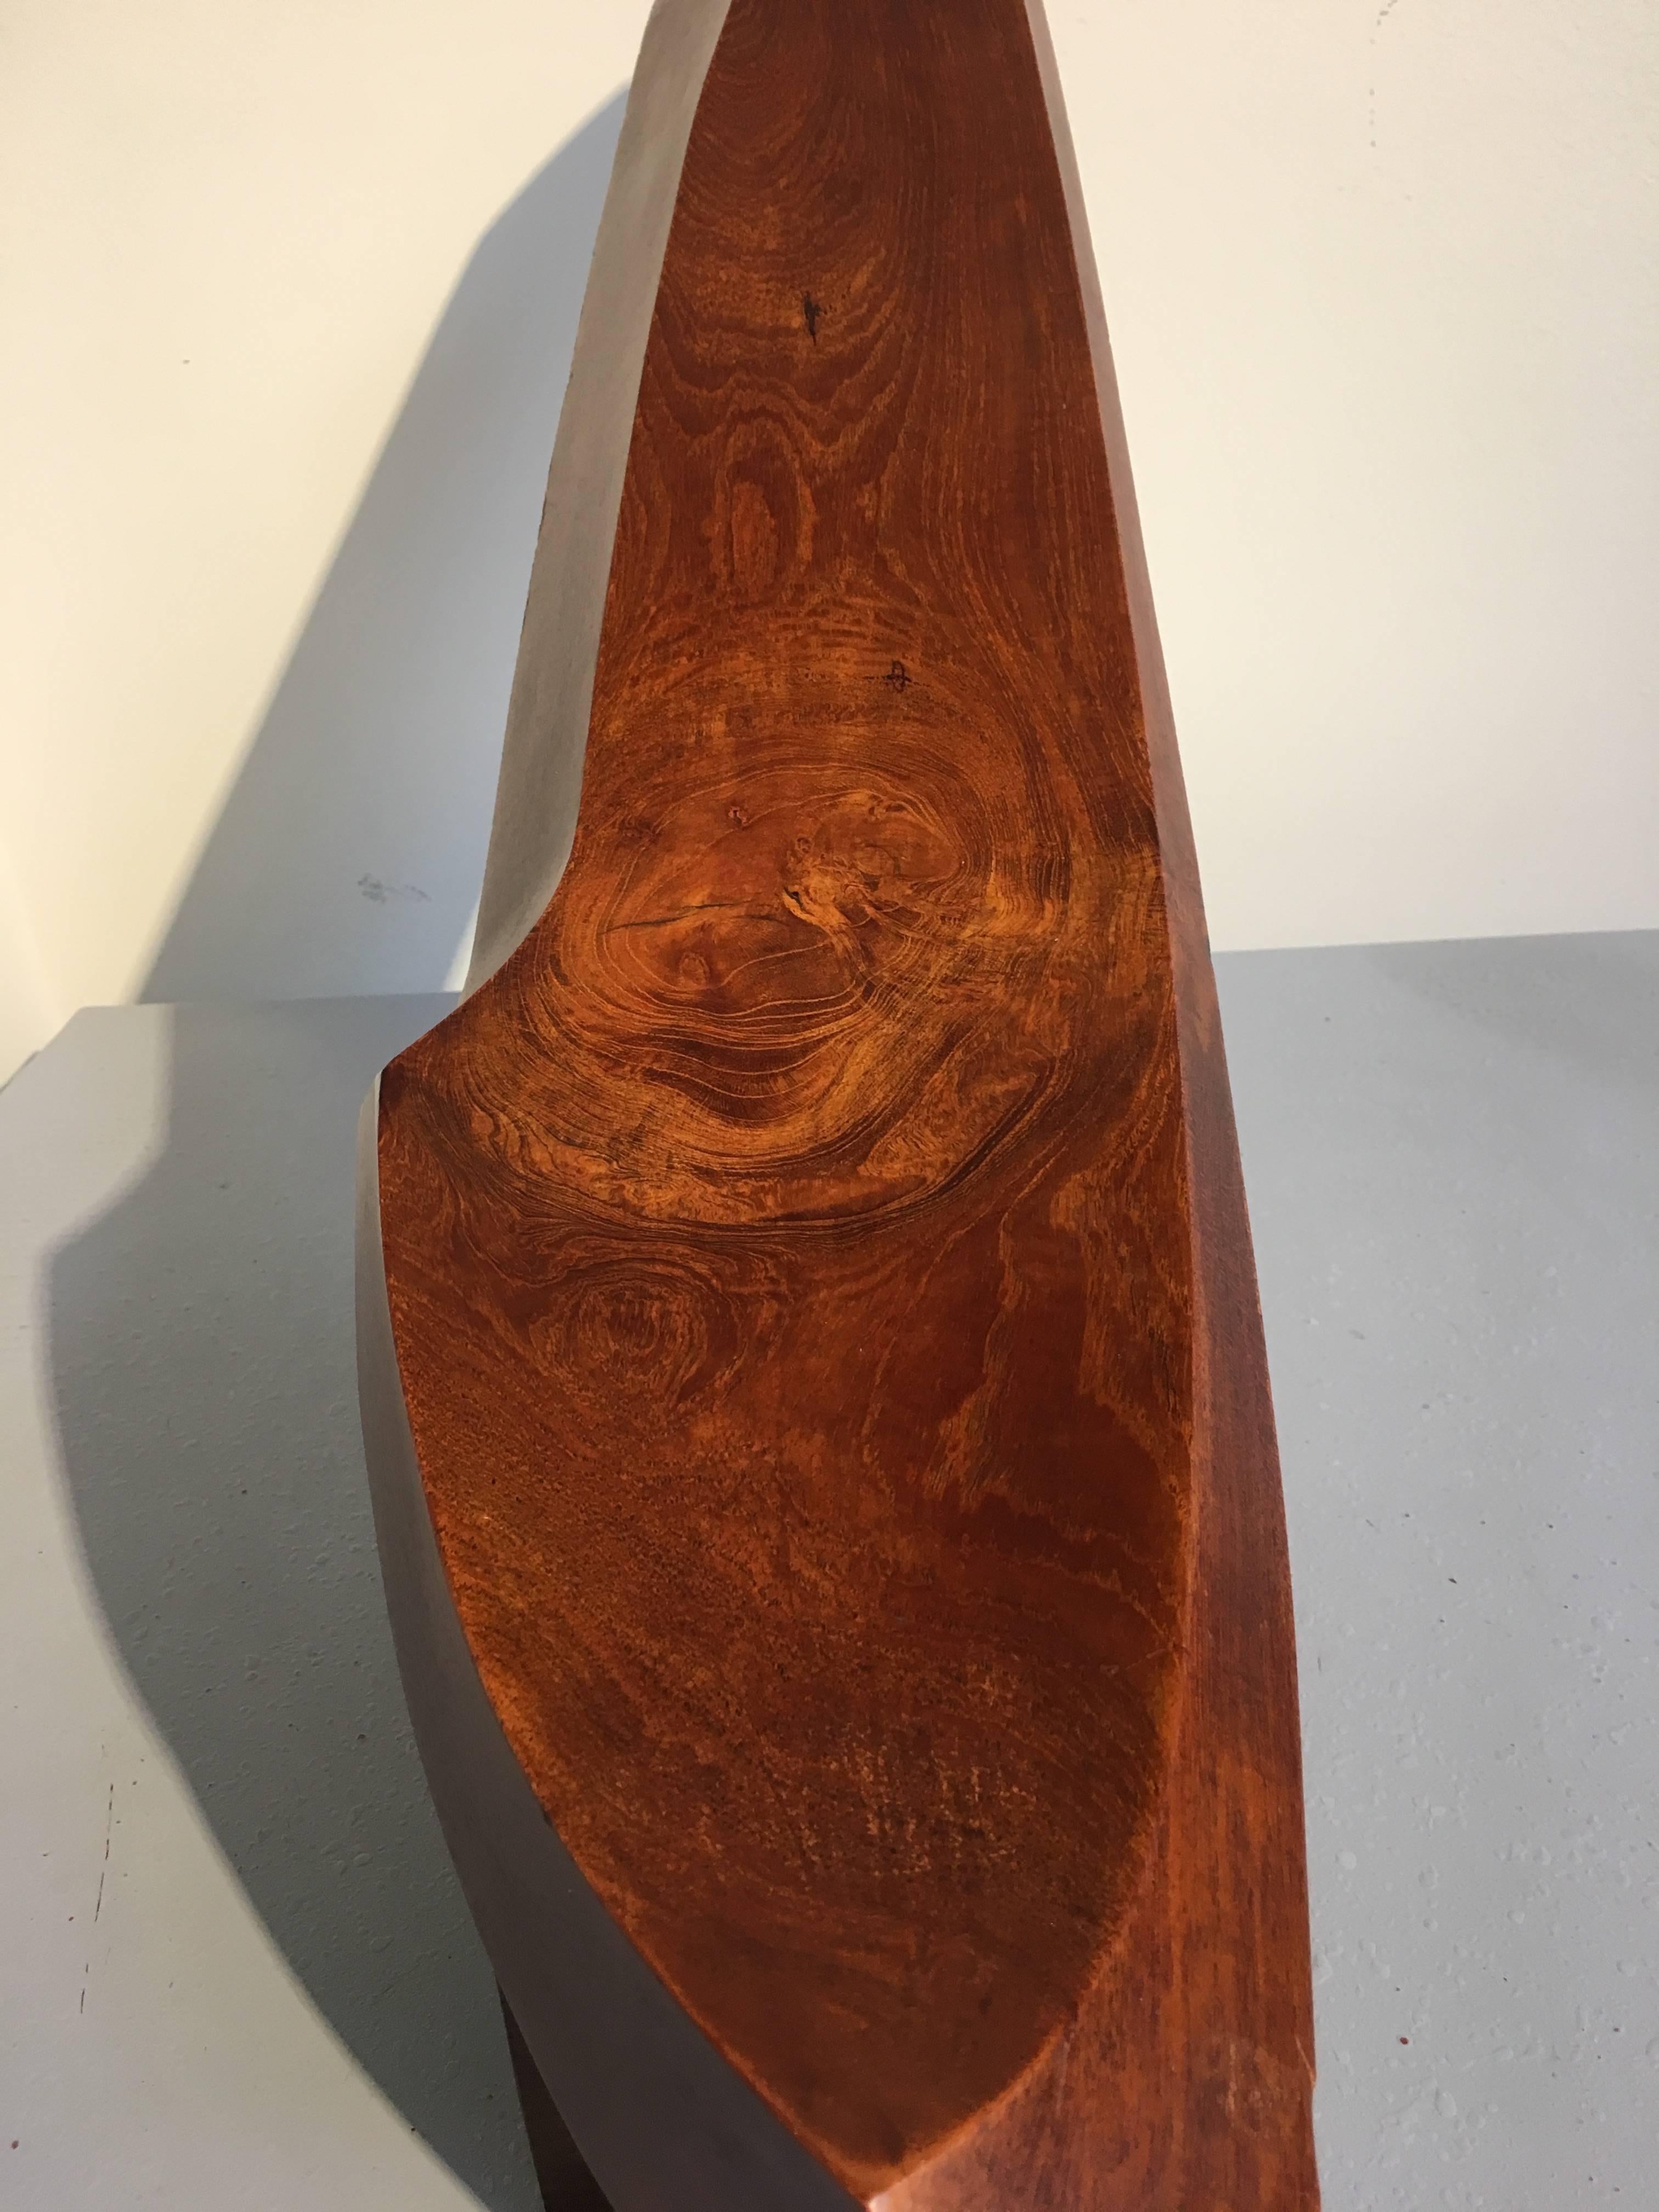 Japanese Abstract Expressionist Carved Wood Sculpture by Takao Kimura In Good Condition For Sale In Austin, TX